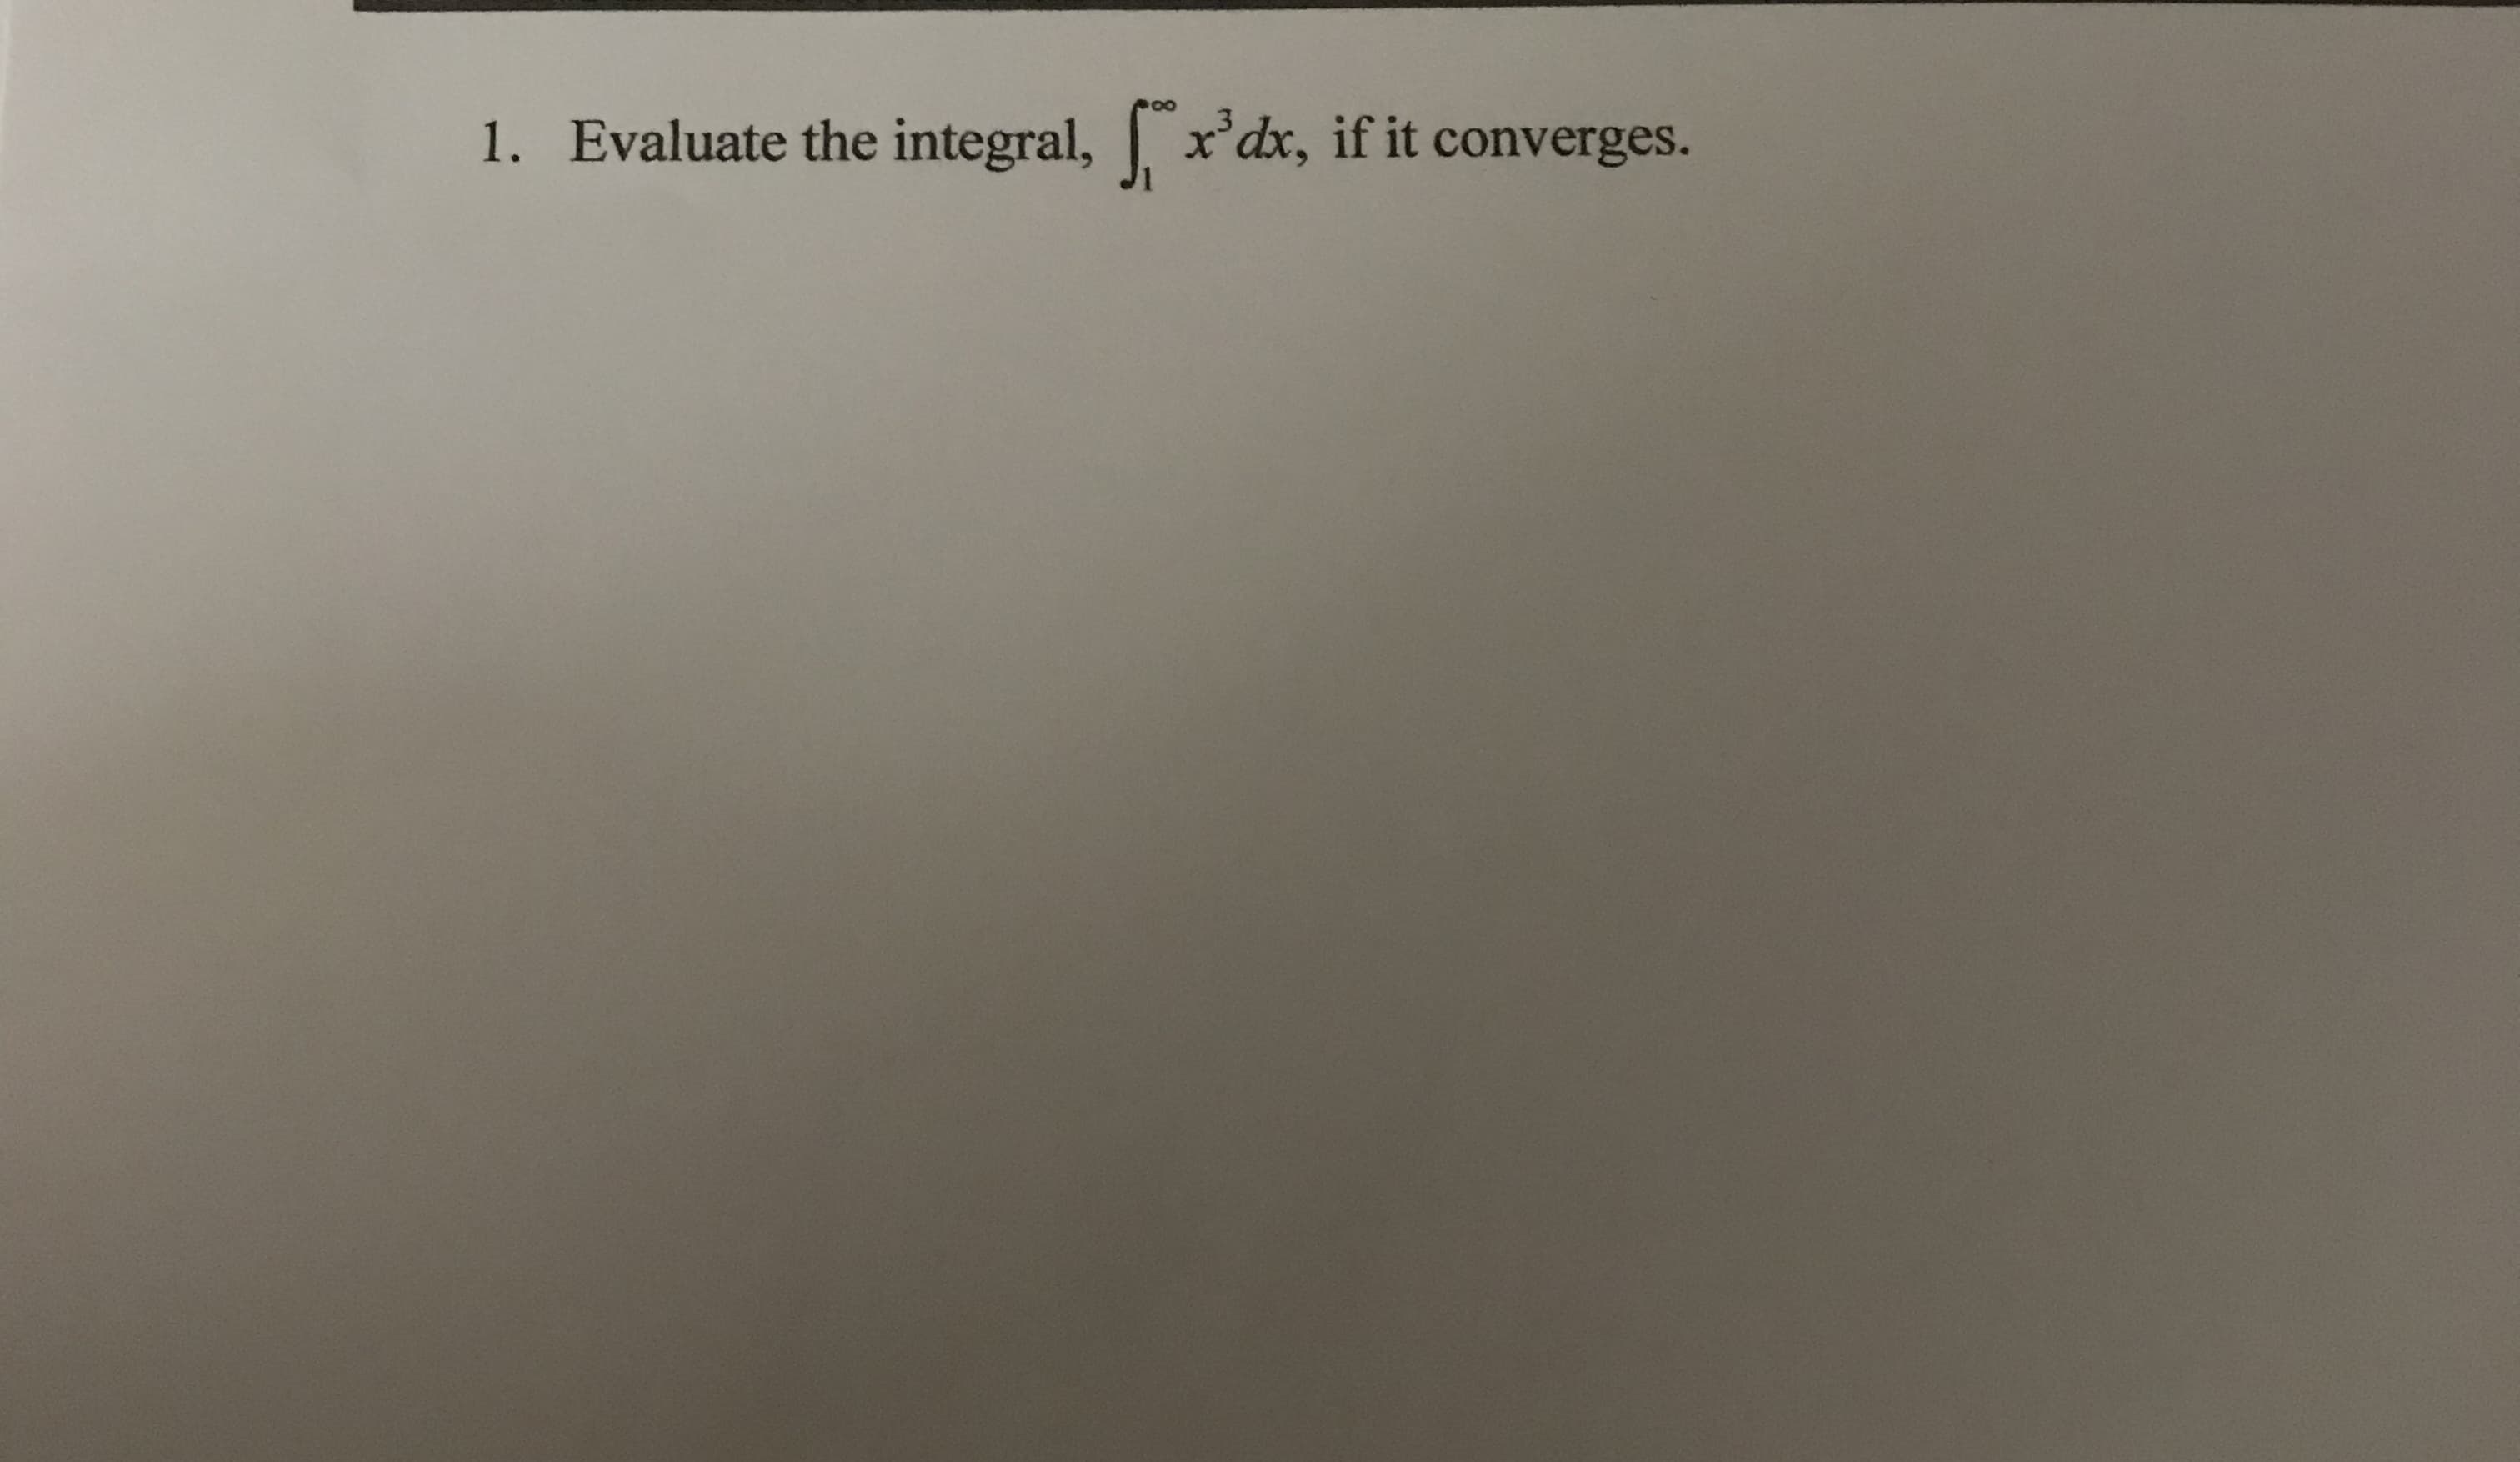 1. Evaluate the integral, x'dx, if it converges.
